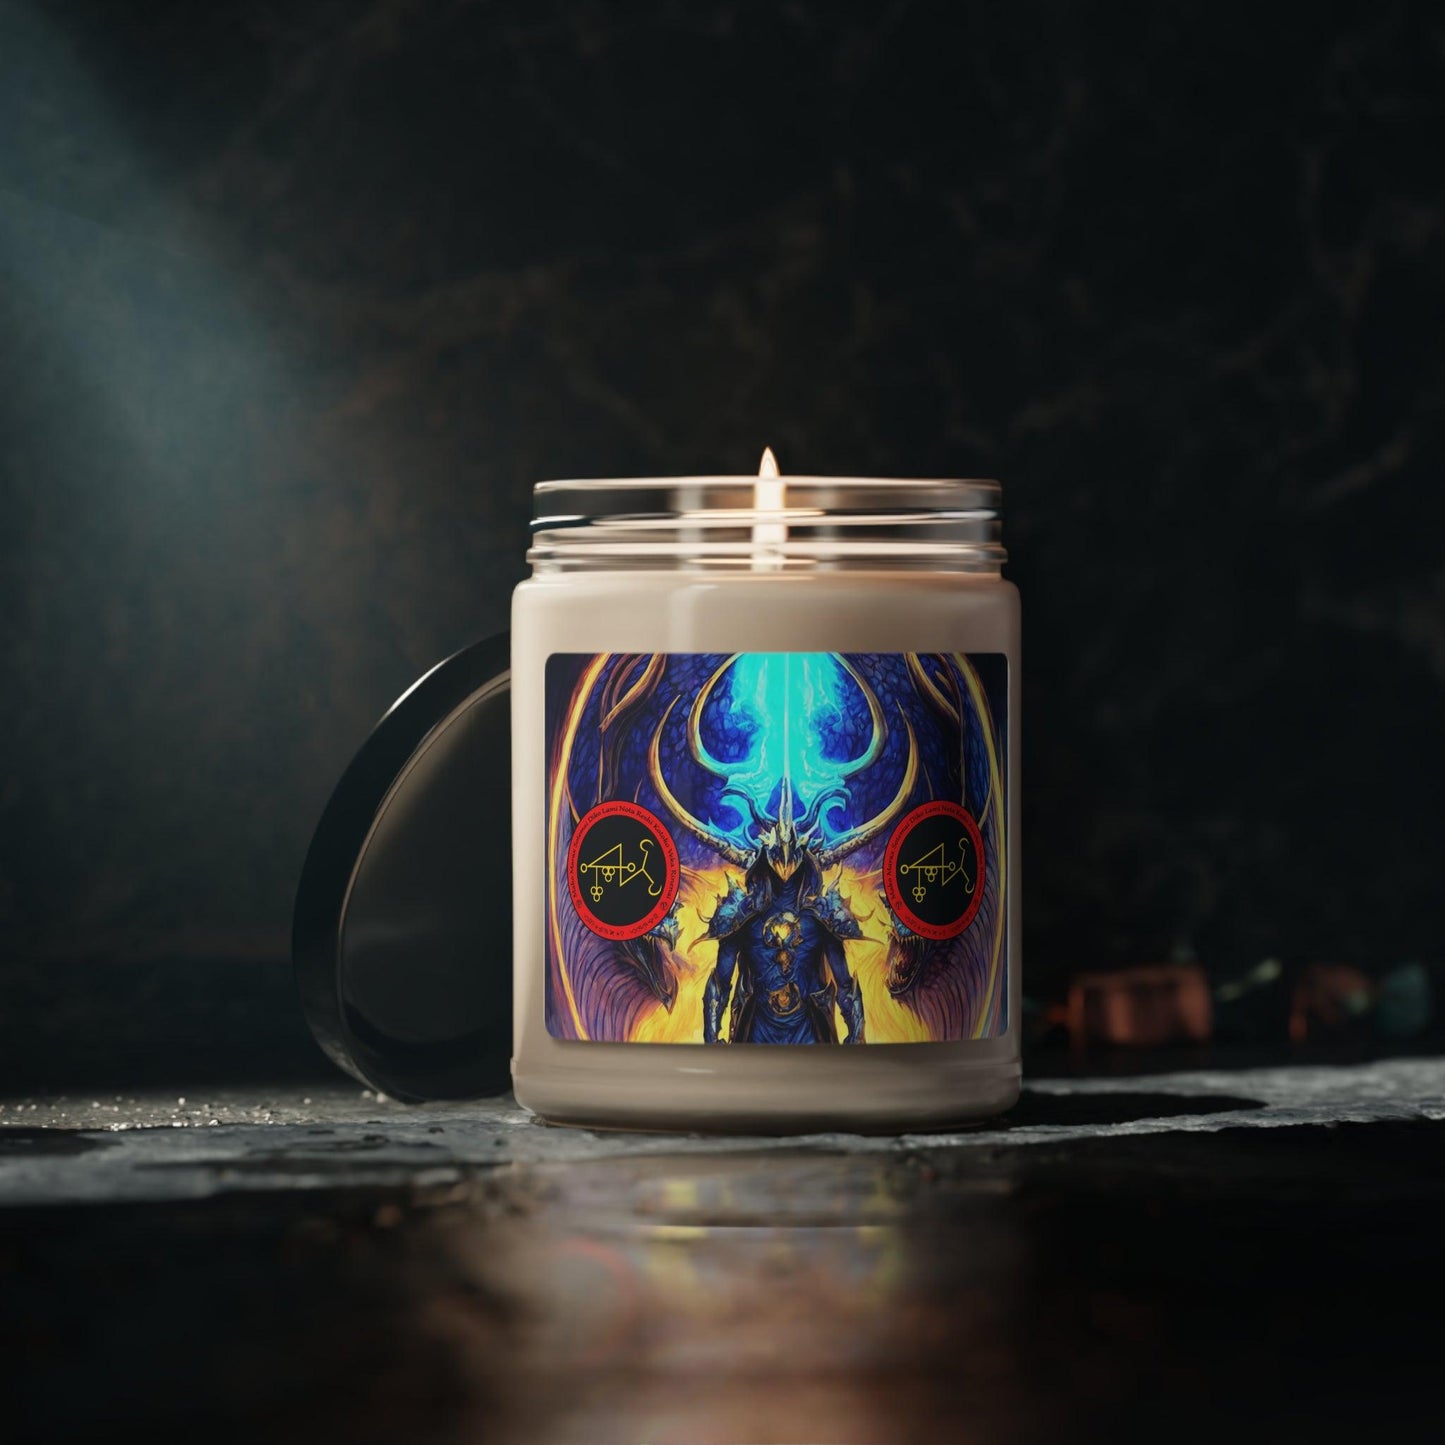 Demon-Marax-Altar-Scented-Soyed-Candle-To-Learn-Magic-and-witchcraft-in-προσφορές-τελετουργίες-μύηση-ή-προσευχή-και-διαλογισμός-10